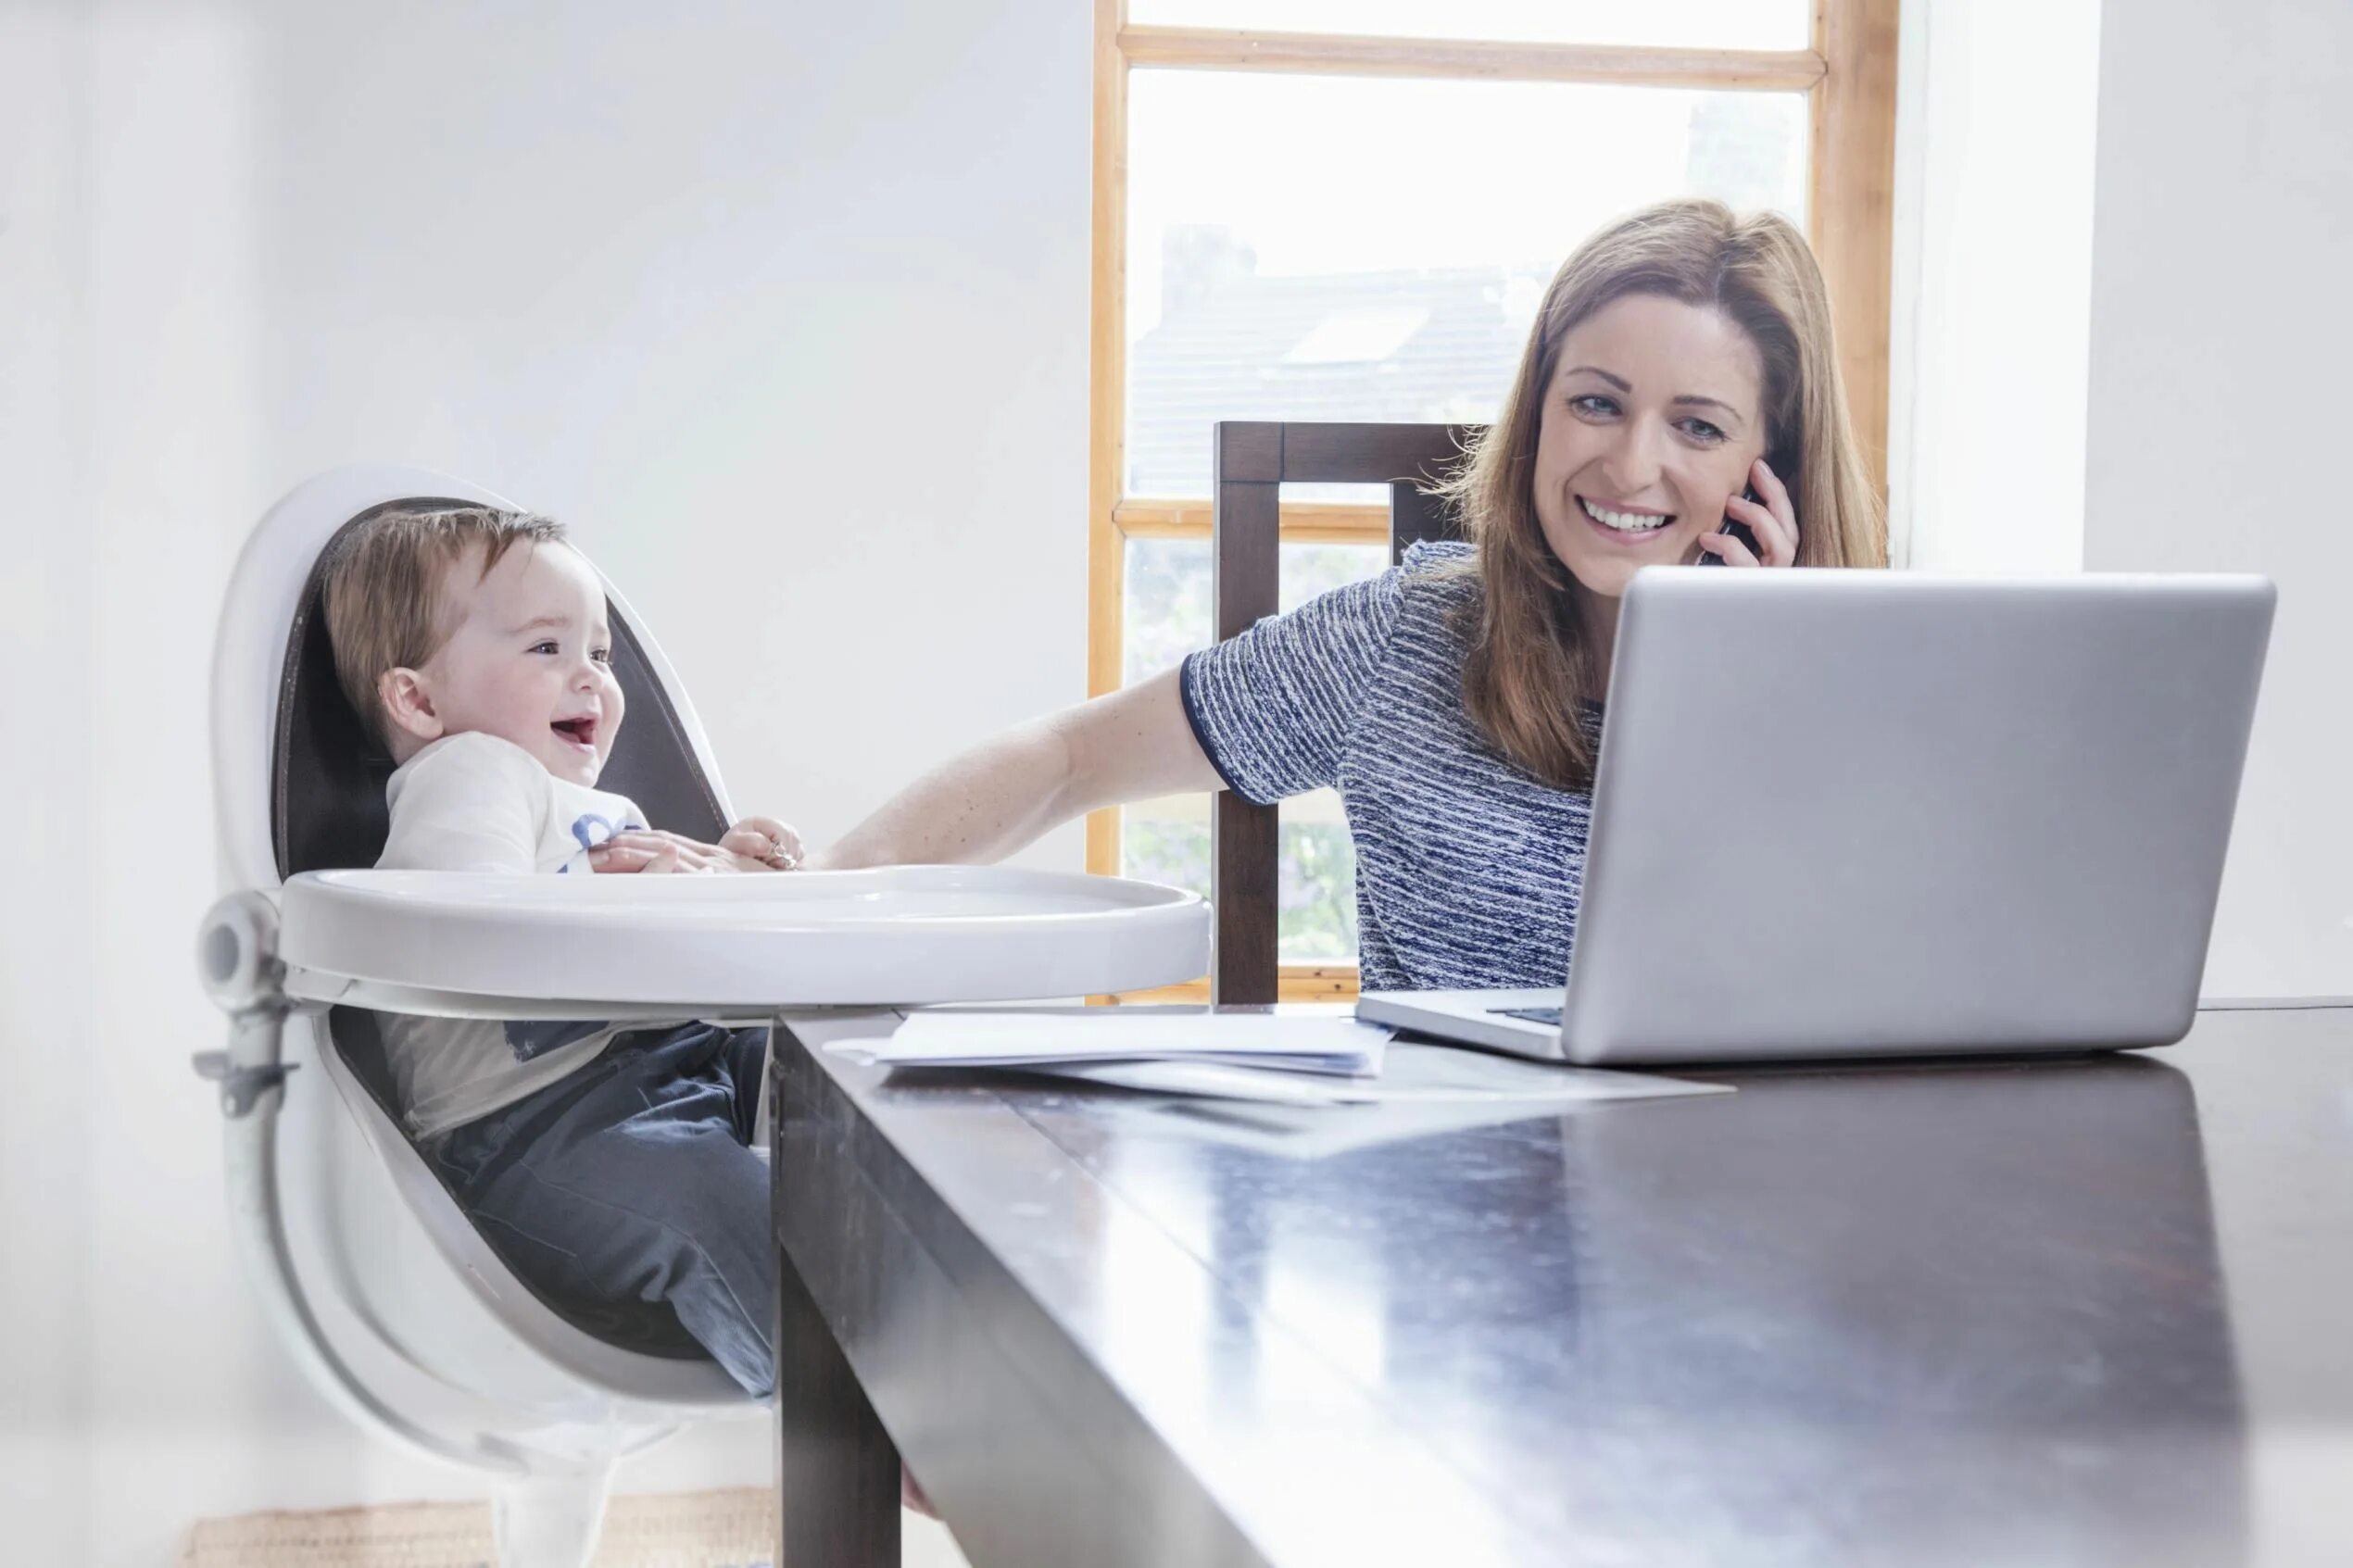 To stay at home working. Stay at Home mom. Working from Home с детьми картинки. Balanced working from Home mom. Stay at Home and work.